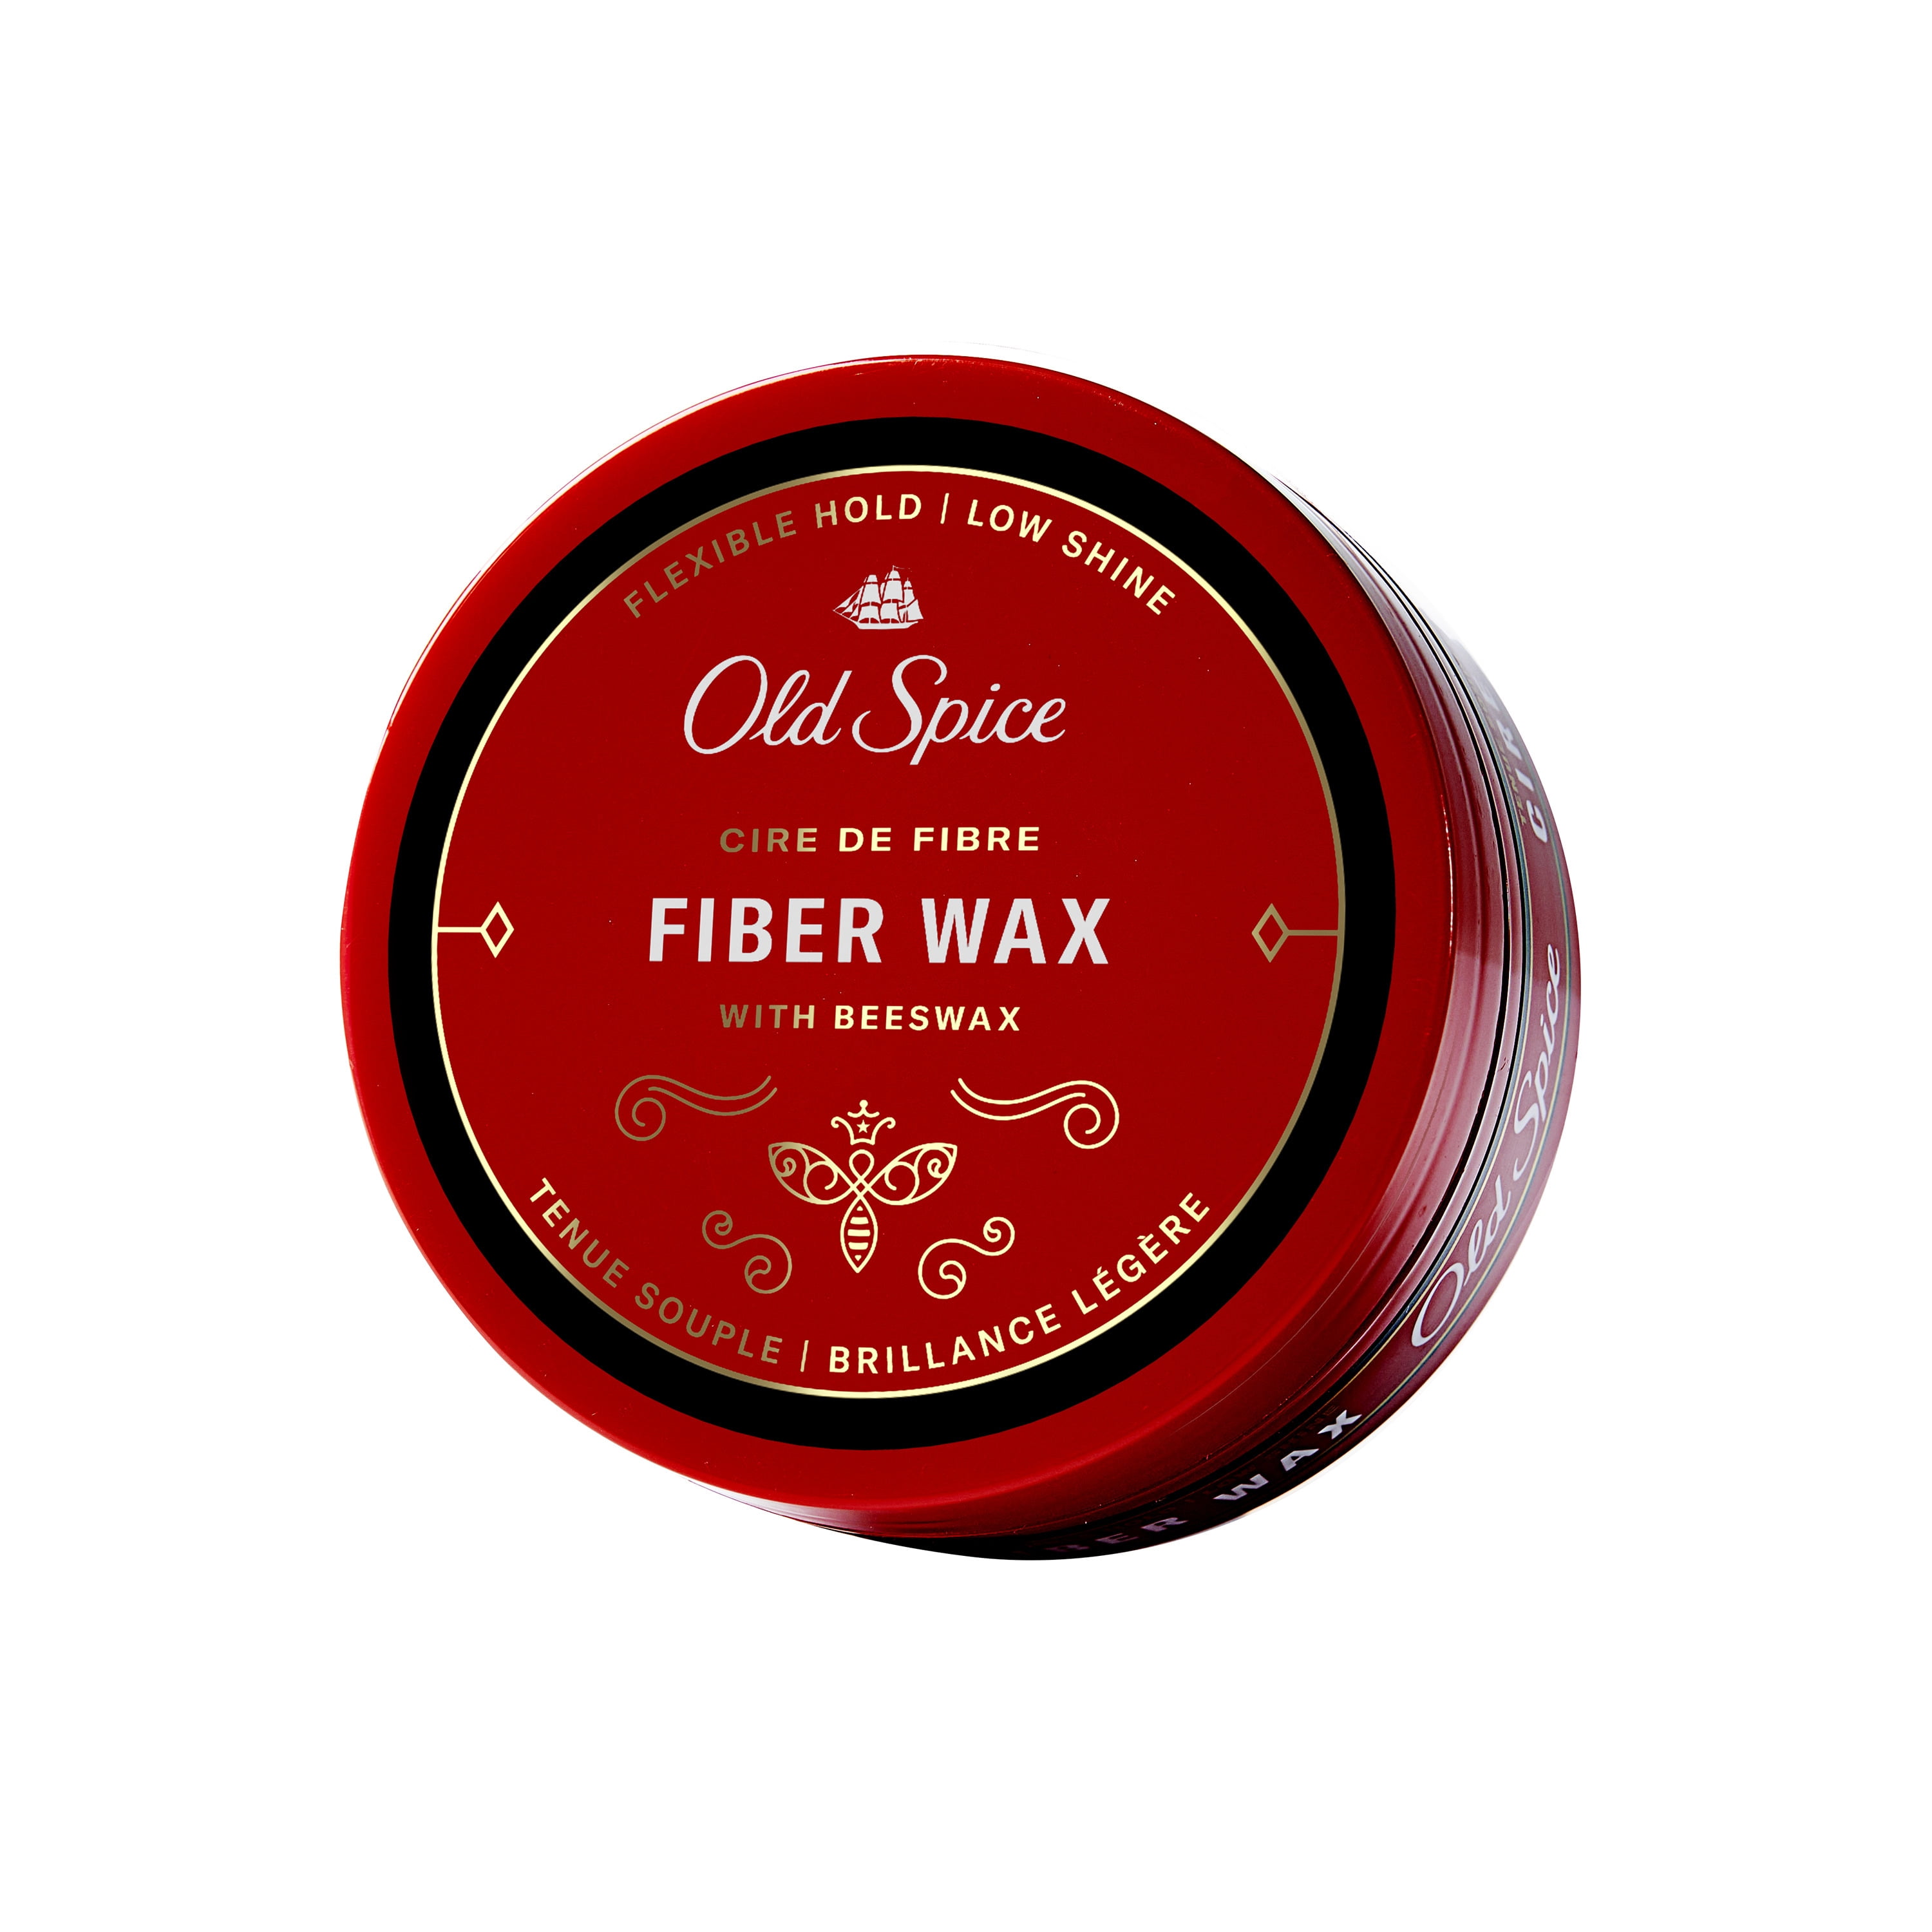 Old Spice Hair Styling Fiber Wax for Men, Flexible Hold, 2.22 oz